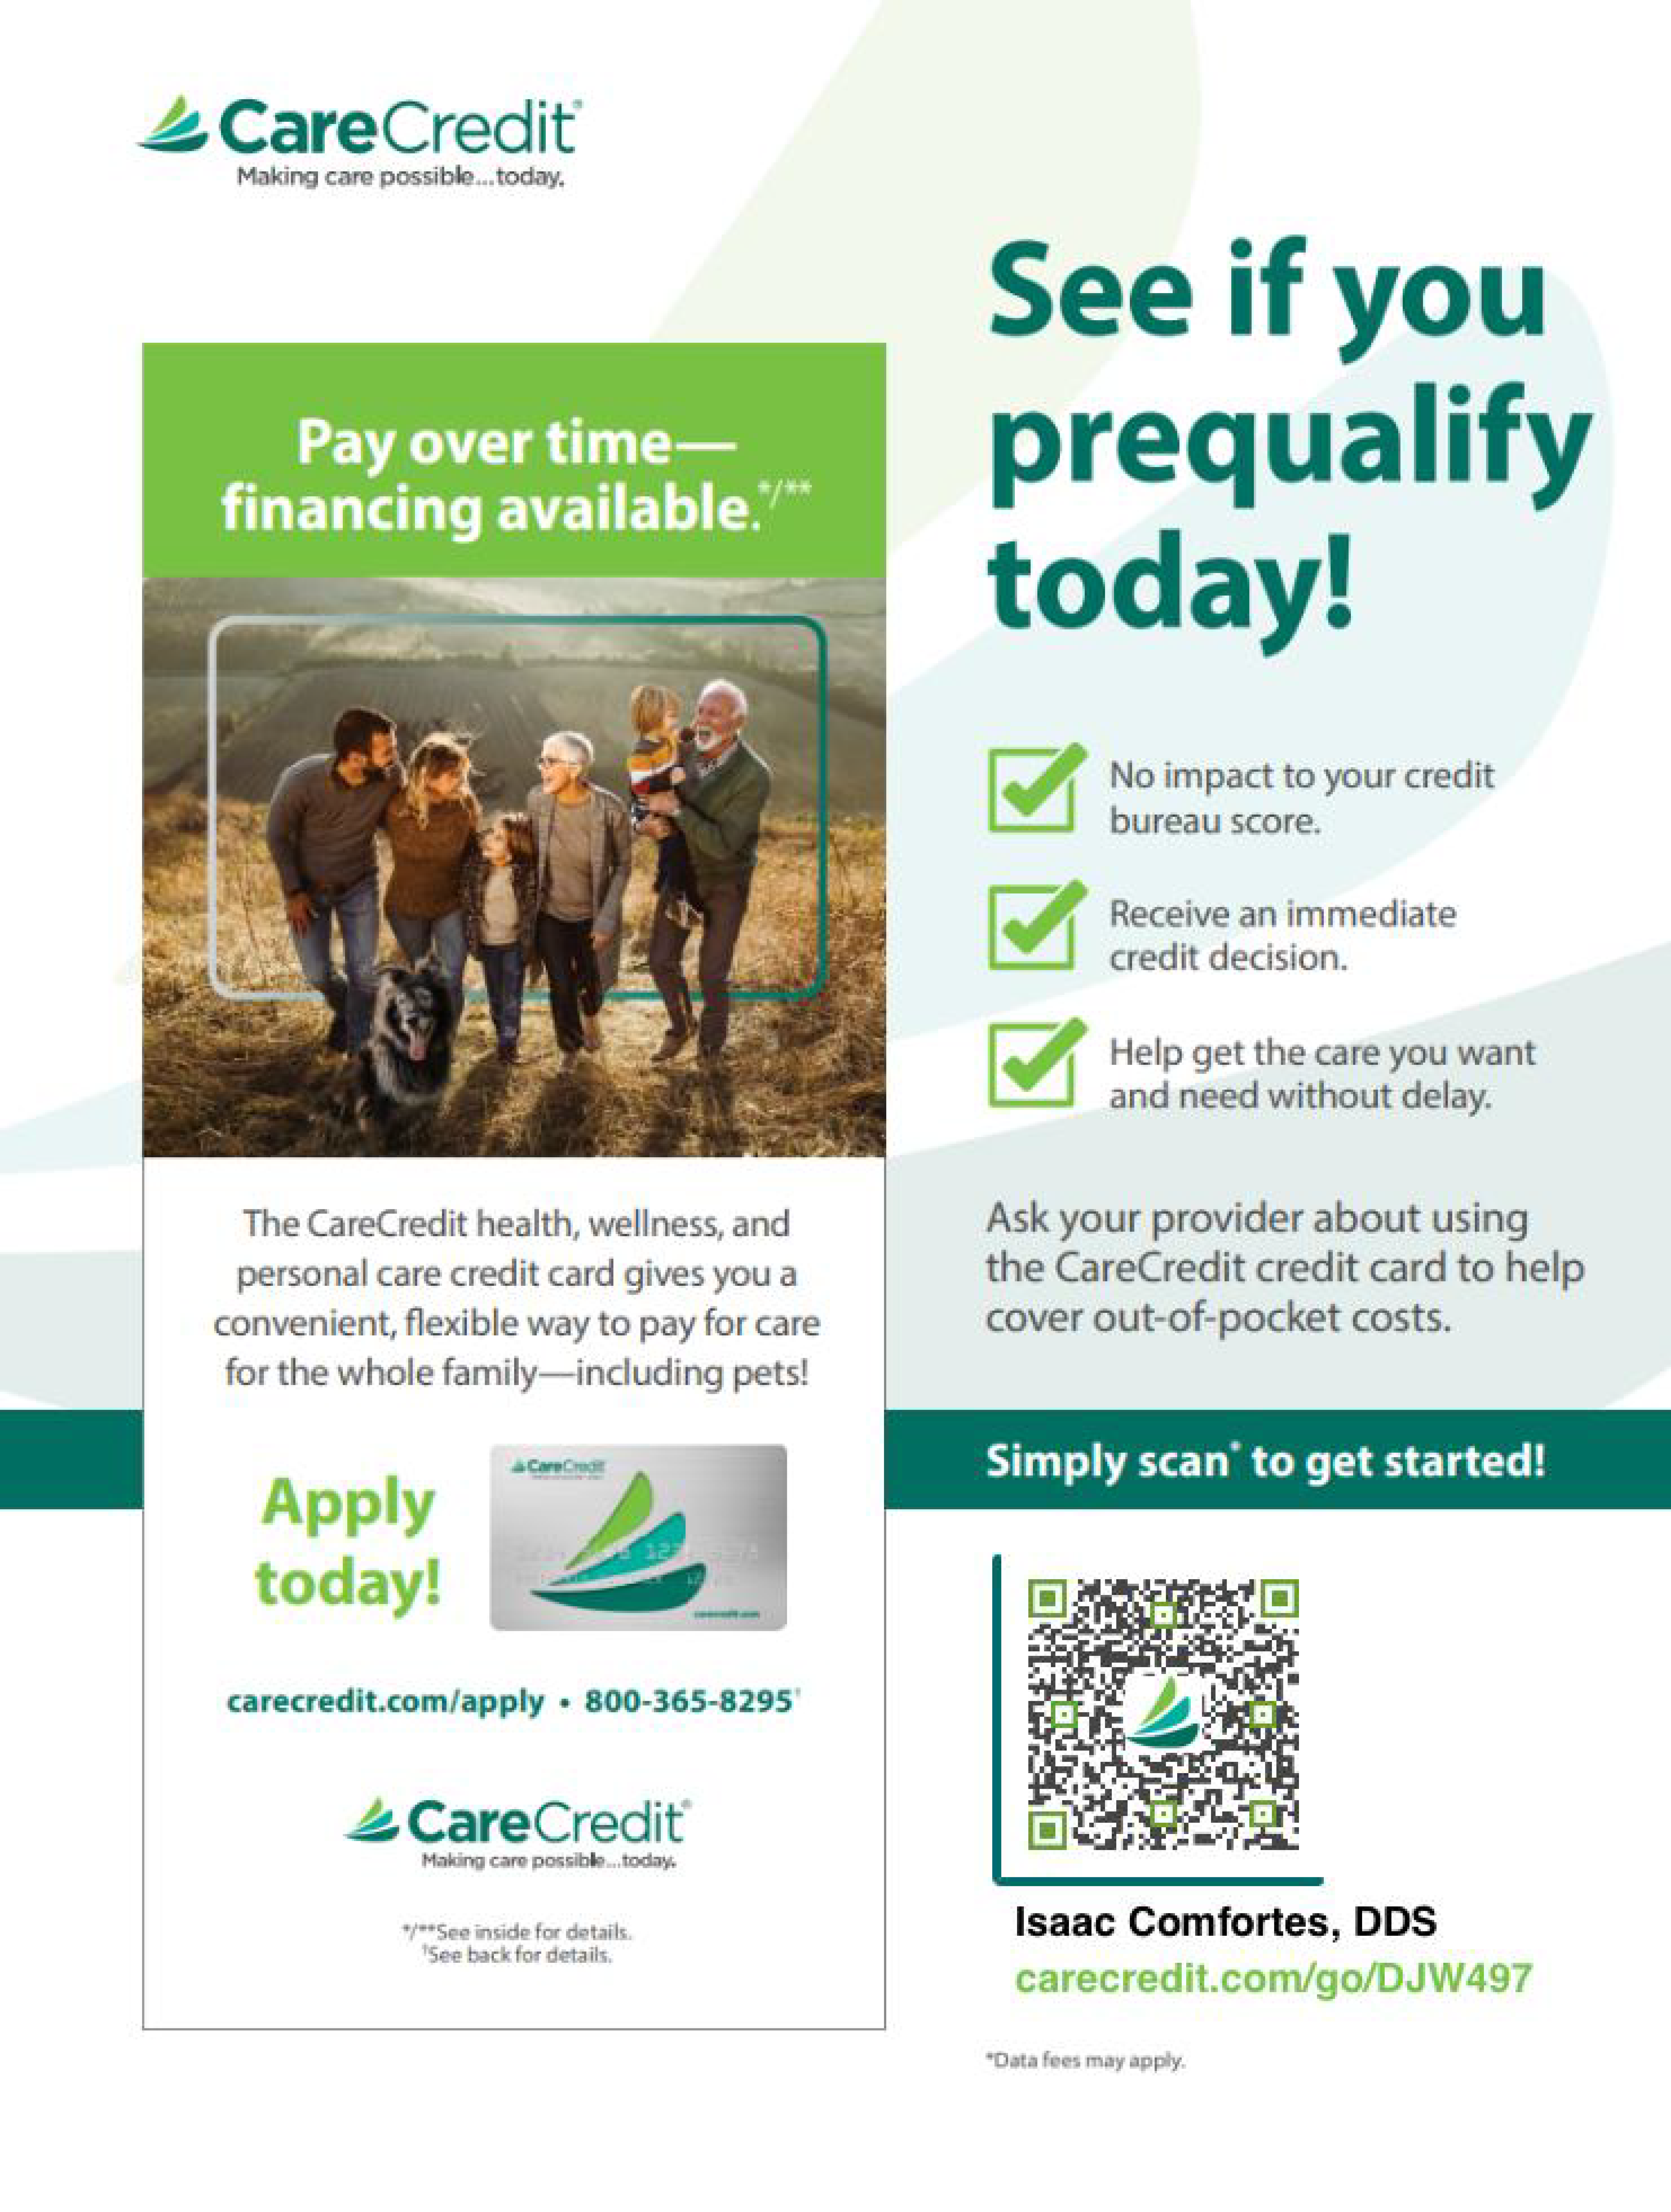 See if you prequalify 
today! 
No impact to  your credit bureau score.
Receive an immediate credit decision.
Help get the care you want.

The CareCredit health, wellness, and personal care credit card gives you a convenient, flexible way to pay for care for the whole family-including pets!

Apply today!